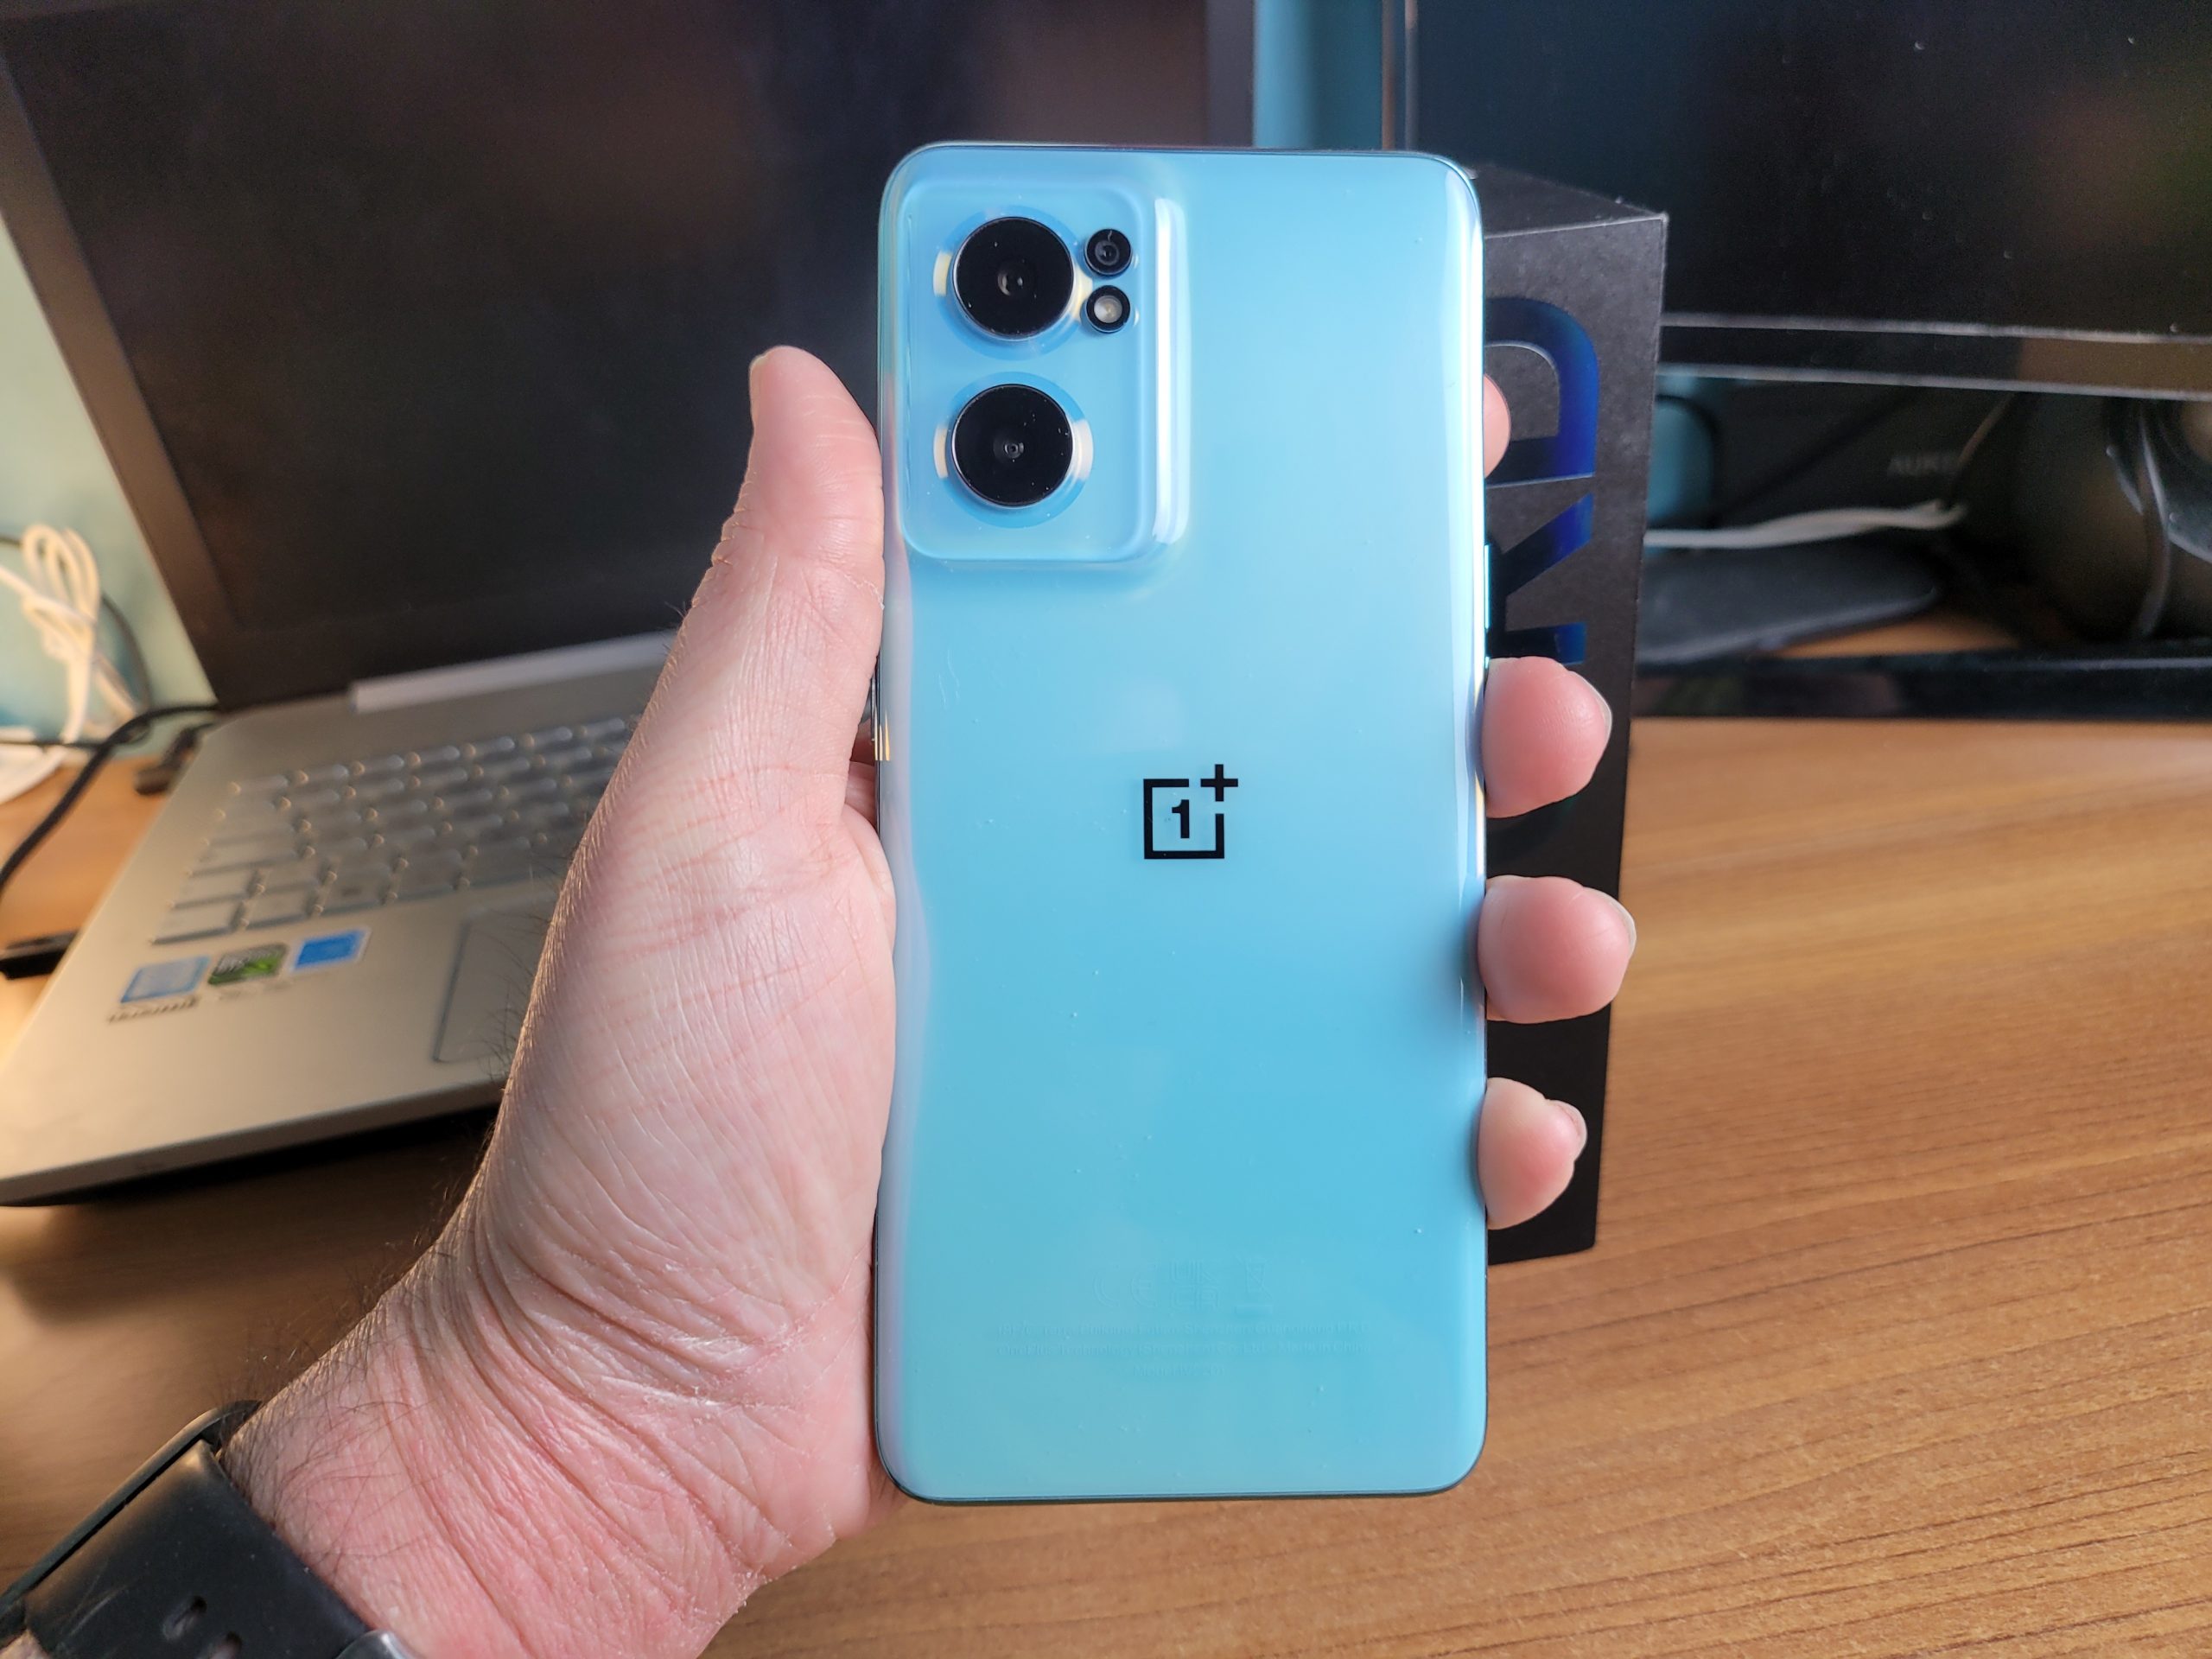 20220513 231323 scaled - OnePlus Nord CE 2 5G recensione